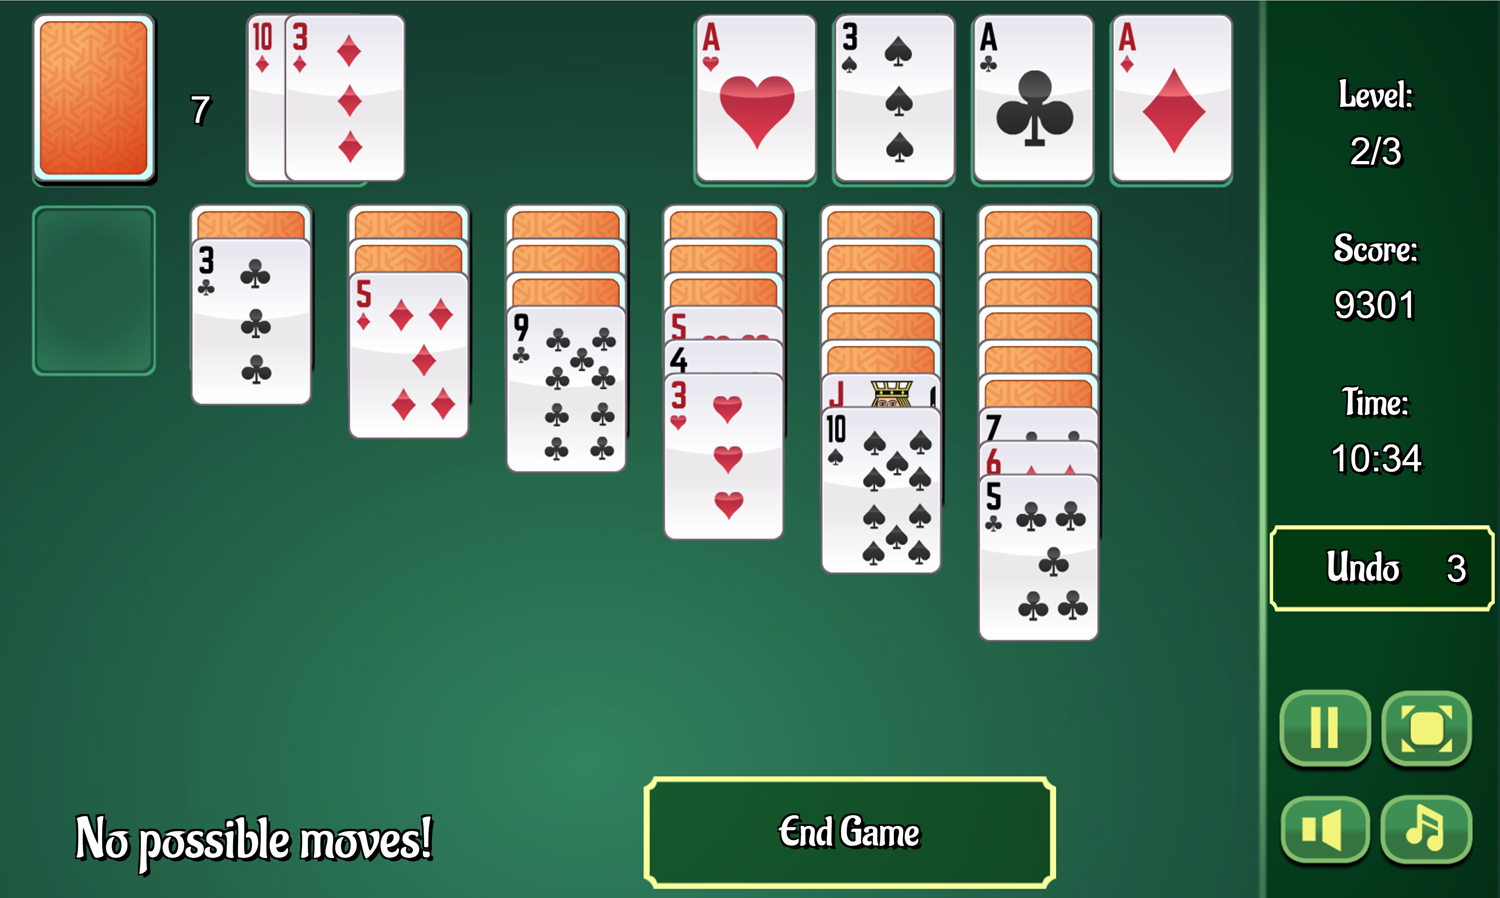 Classic Solitaire Game No Possible Moves Screen Screenshot.